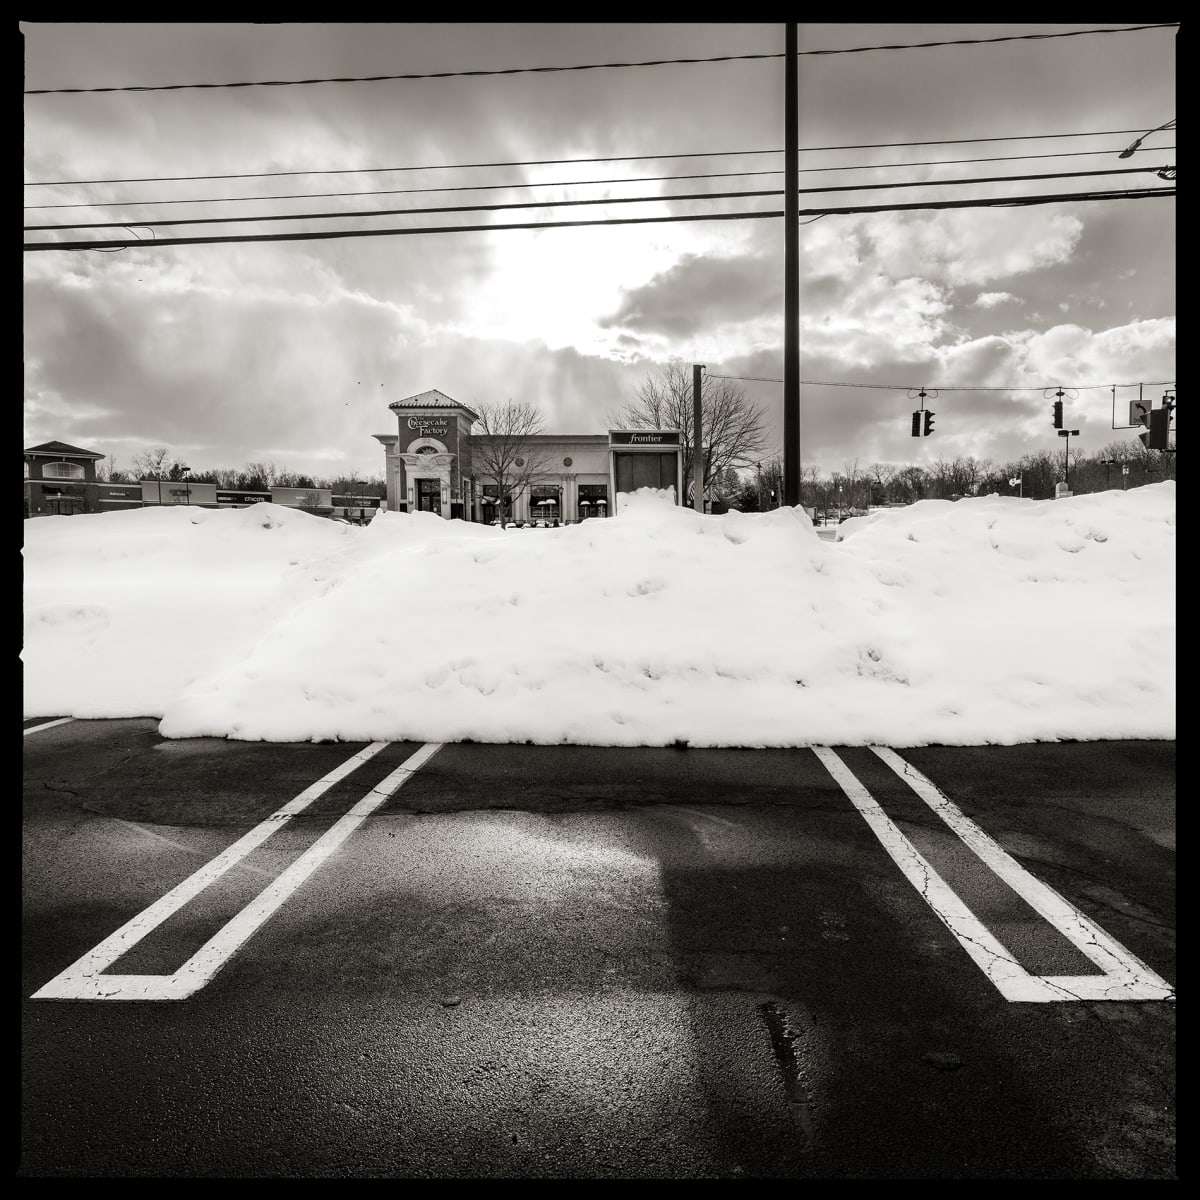 585.586.9201 – Pittsford Place Mall, 3300 Monroe Avenue, Rochester, NY 14618 by Eric T. Kunsman  Image: ID: A black and white image shows a payphone covered in snow.  The foreground is a parking lot and the background has a Cheesecake Factory.  The sky is cloudy with one patch of sun in the middle.  